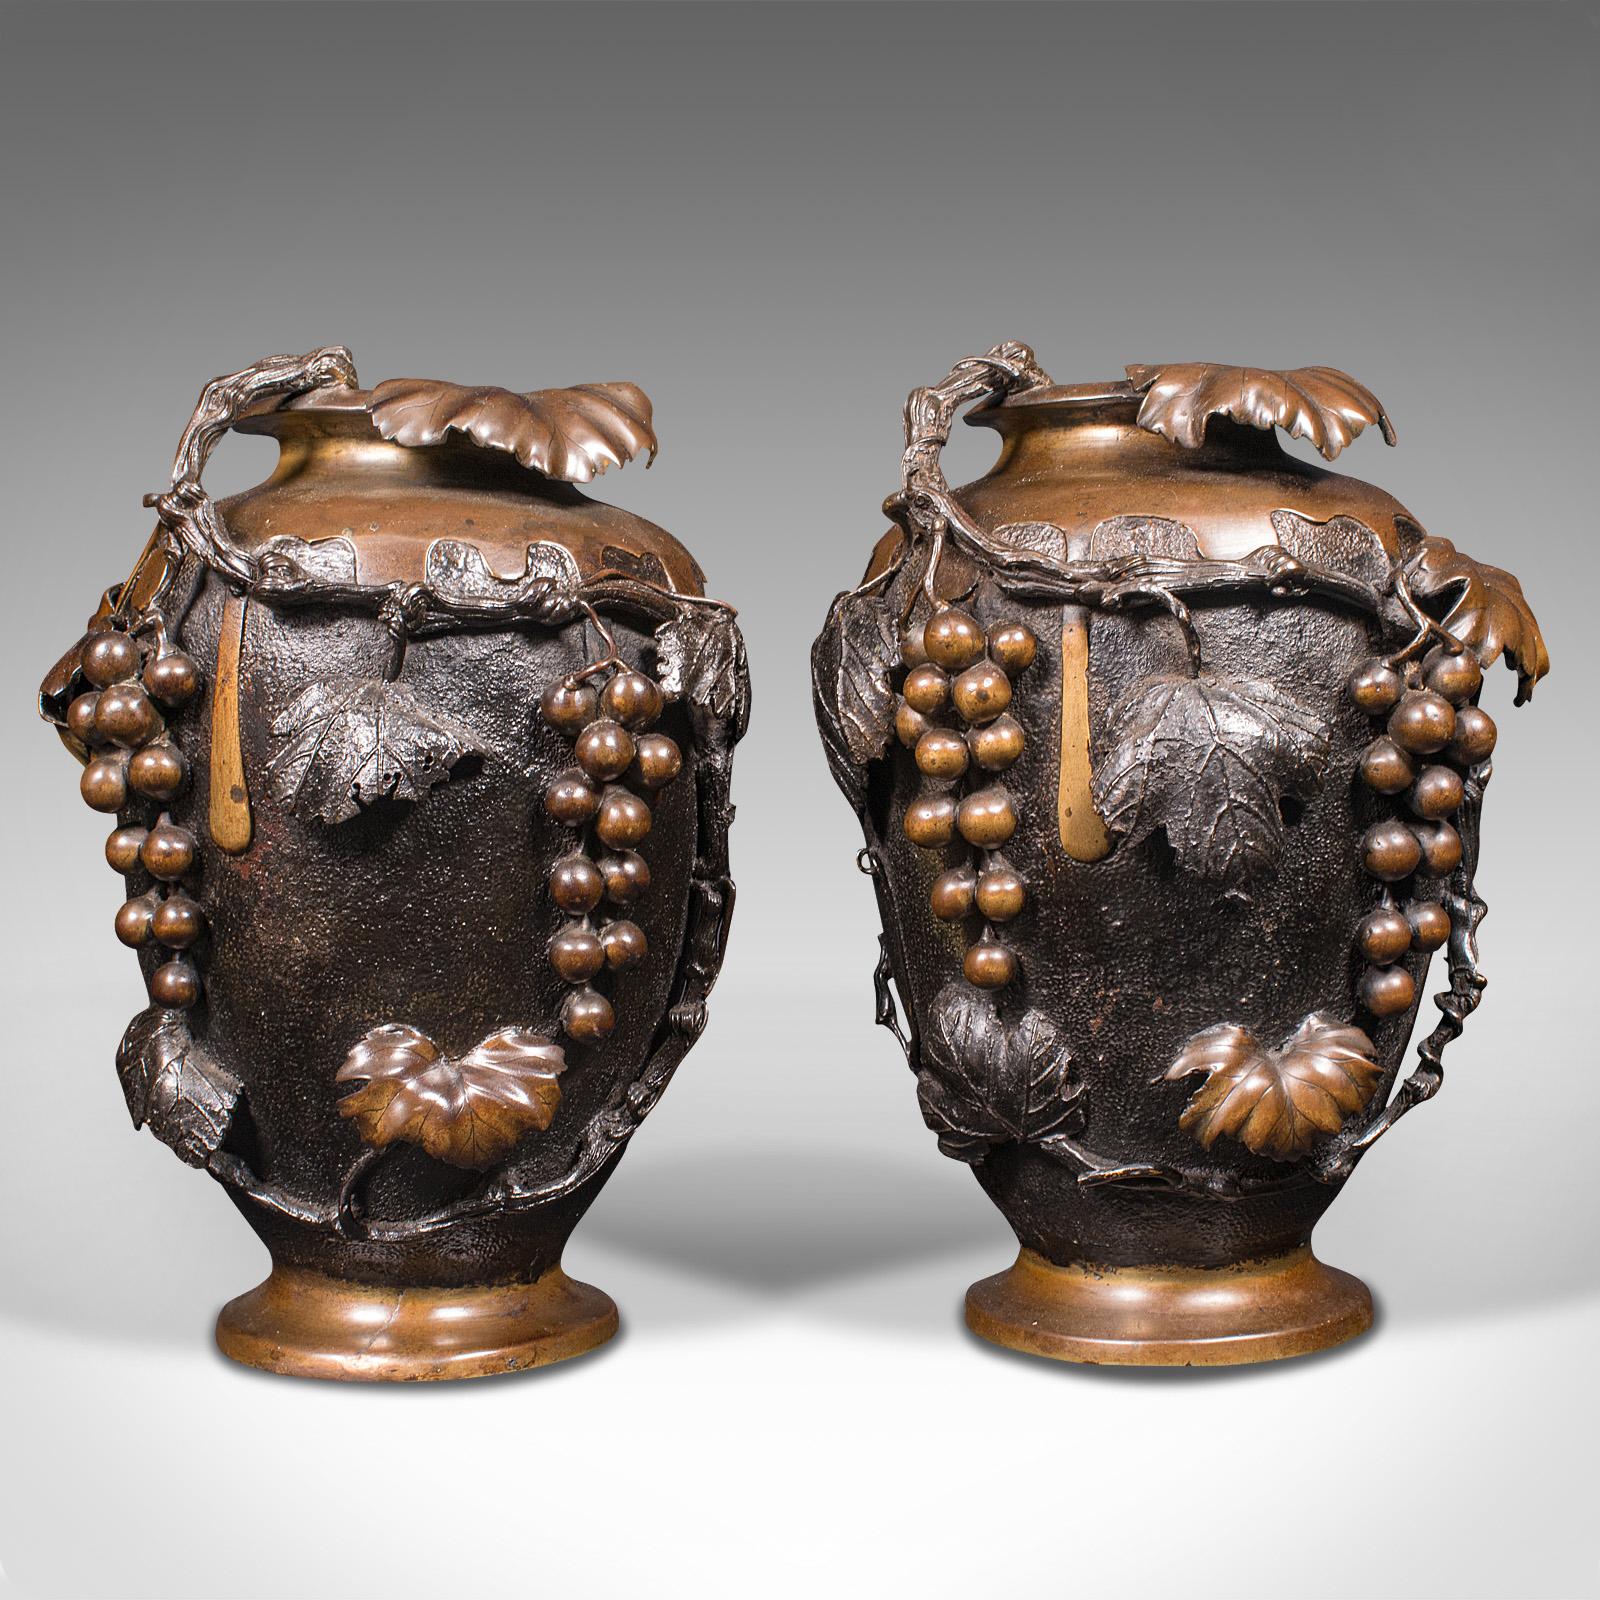 This is a large pair of antique decorative vases. A Japanese, bronze amphora or urn, dating to the late Victorian period, circa 1900.

Strikingly sculpted and finished vases of great proportion
Displays a desirable aged patina and in good